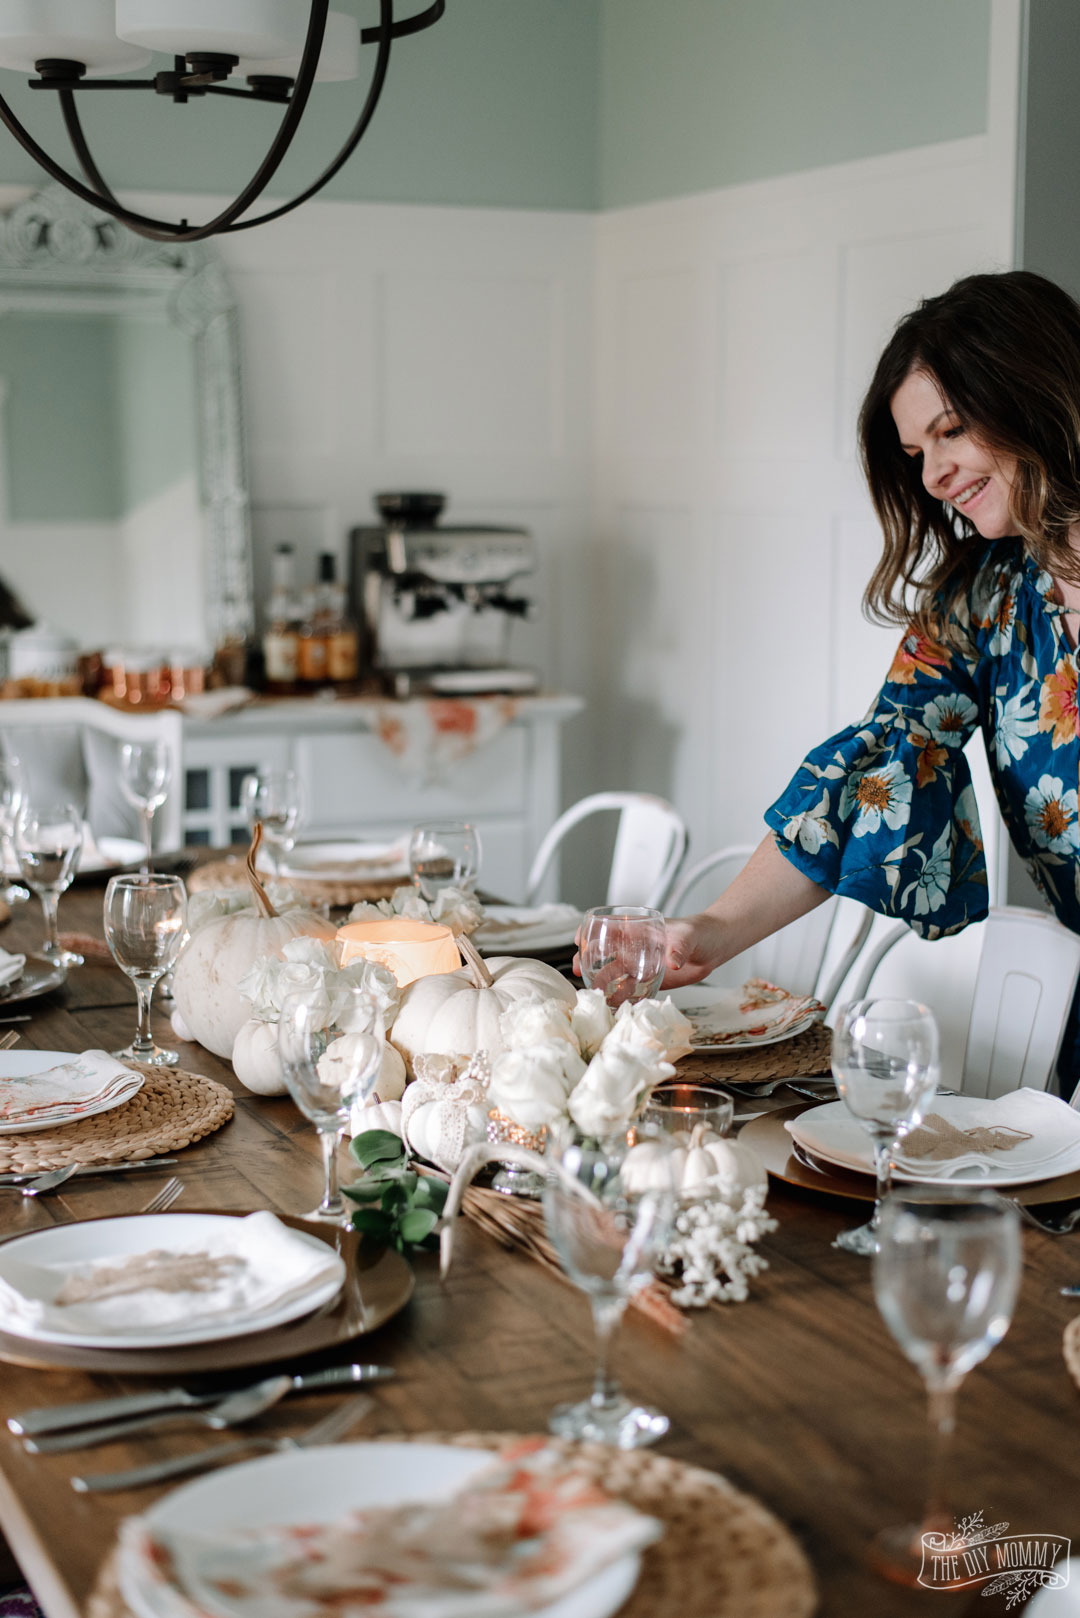 Elegant, romantic Thanksgiving tablescape idea for 12 in whites, creams and a mix and match style